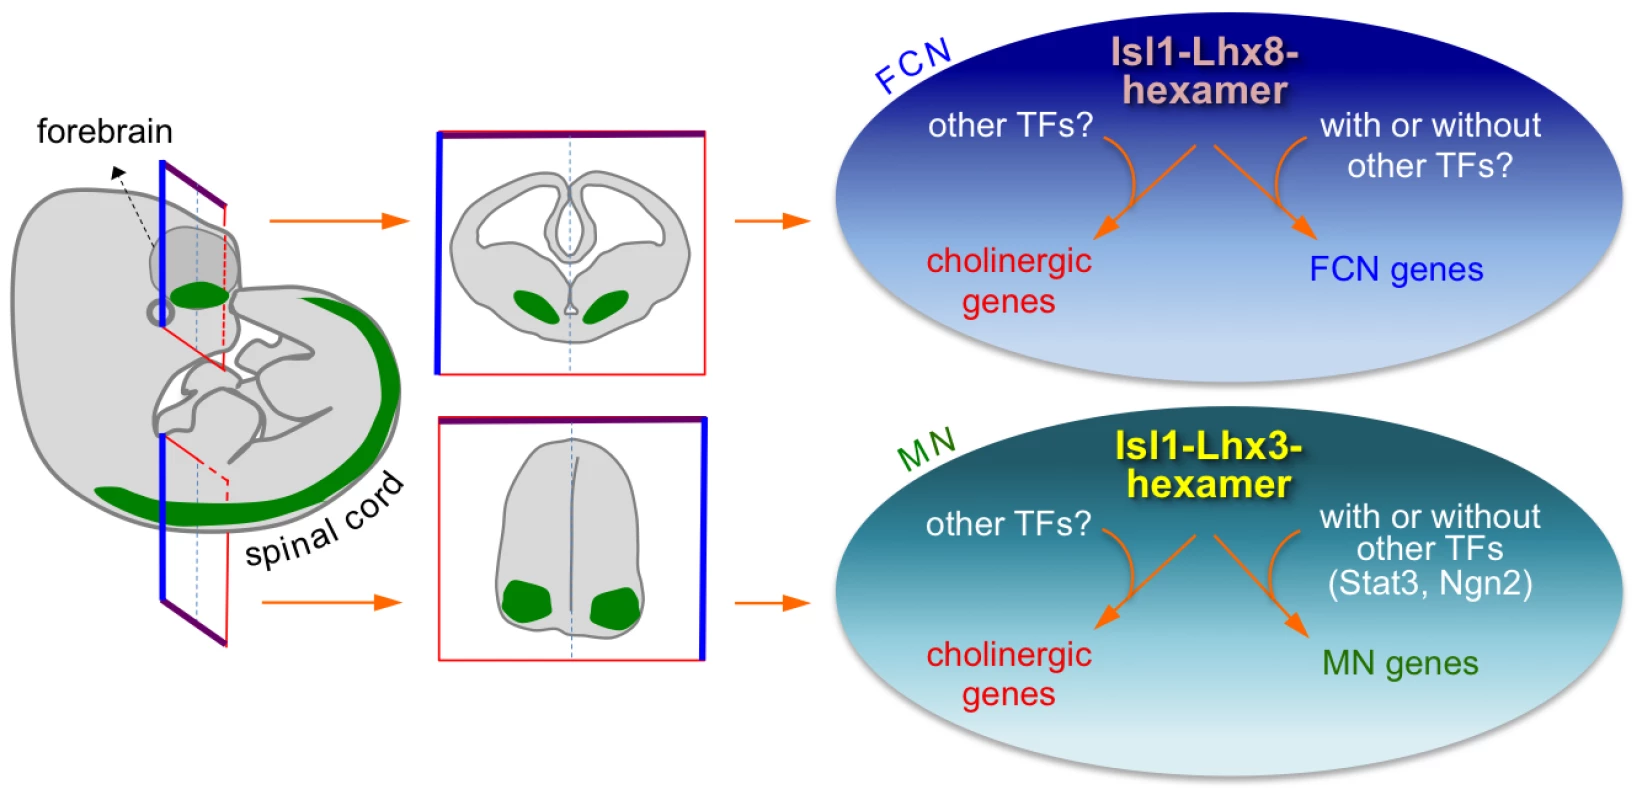 Isl1-Lhx8-hexamer and Isl1-Lhx3-hexamer complexes establish a cholinergic neuronal identity in FCNs and spinal MNs, respectively, by directly upregulating cholinergic gene battery.